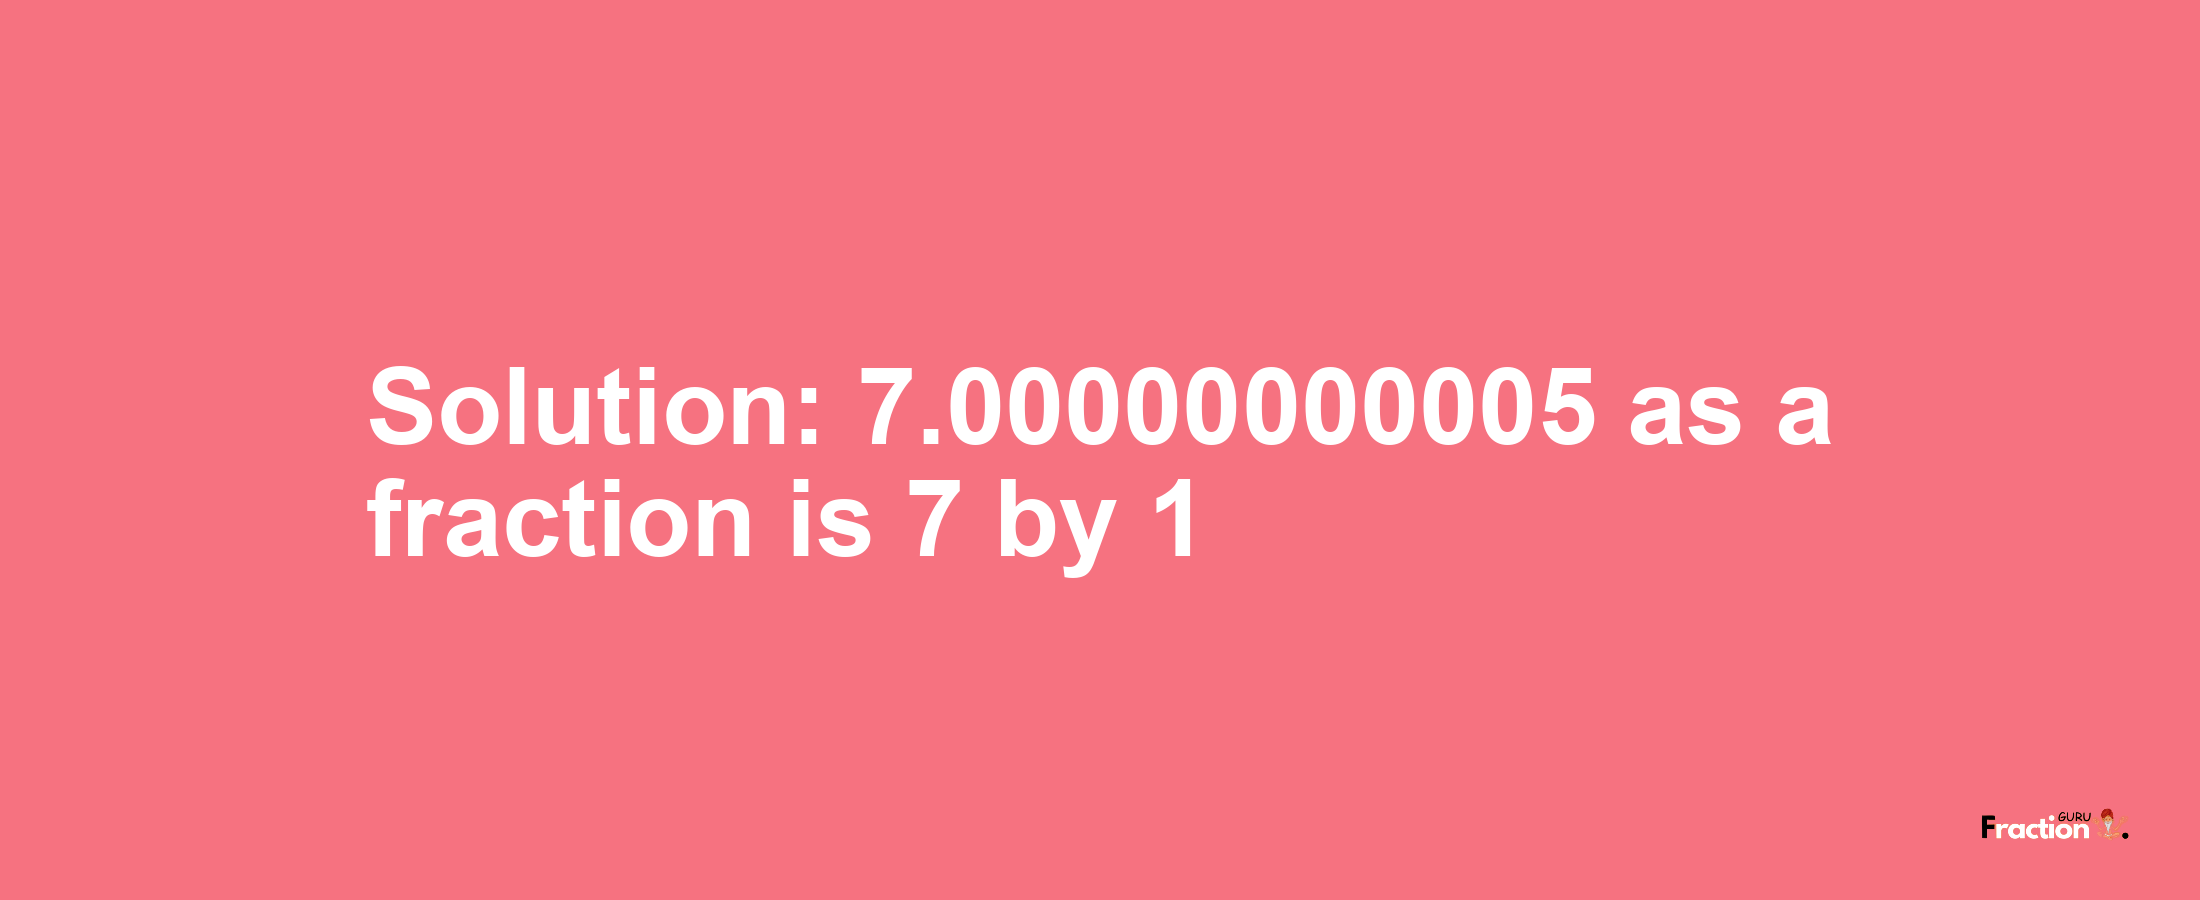 Solution:7.00000000005 as a fraction is 7/1